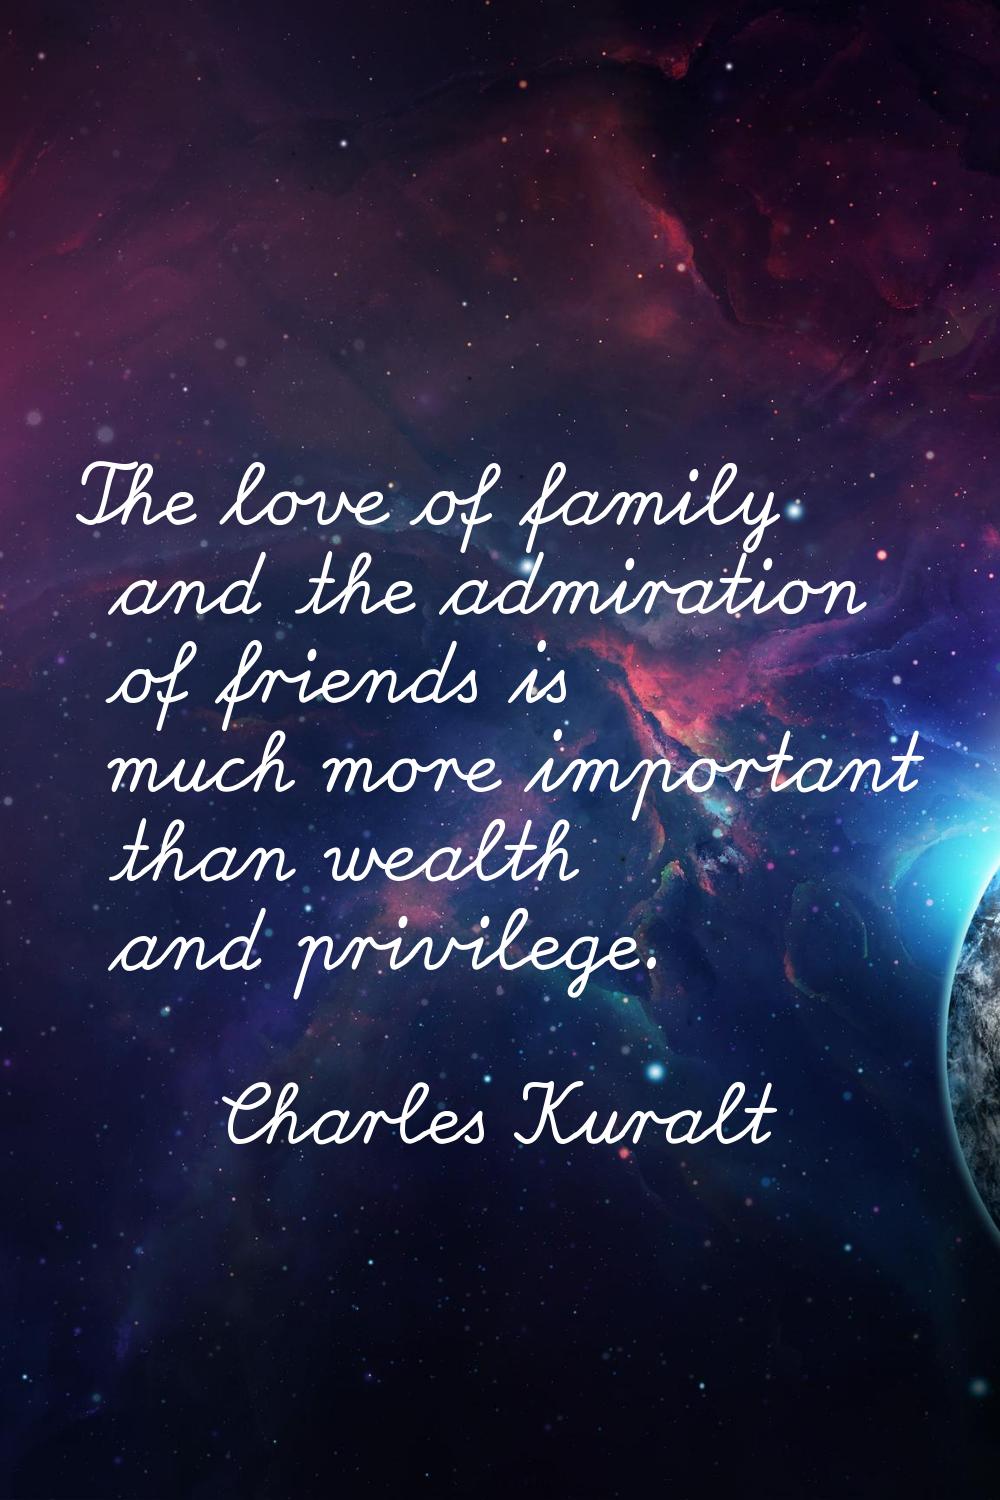 The love of family and the admiration of friends is much more important than wealth and privilege.